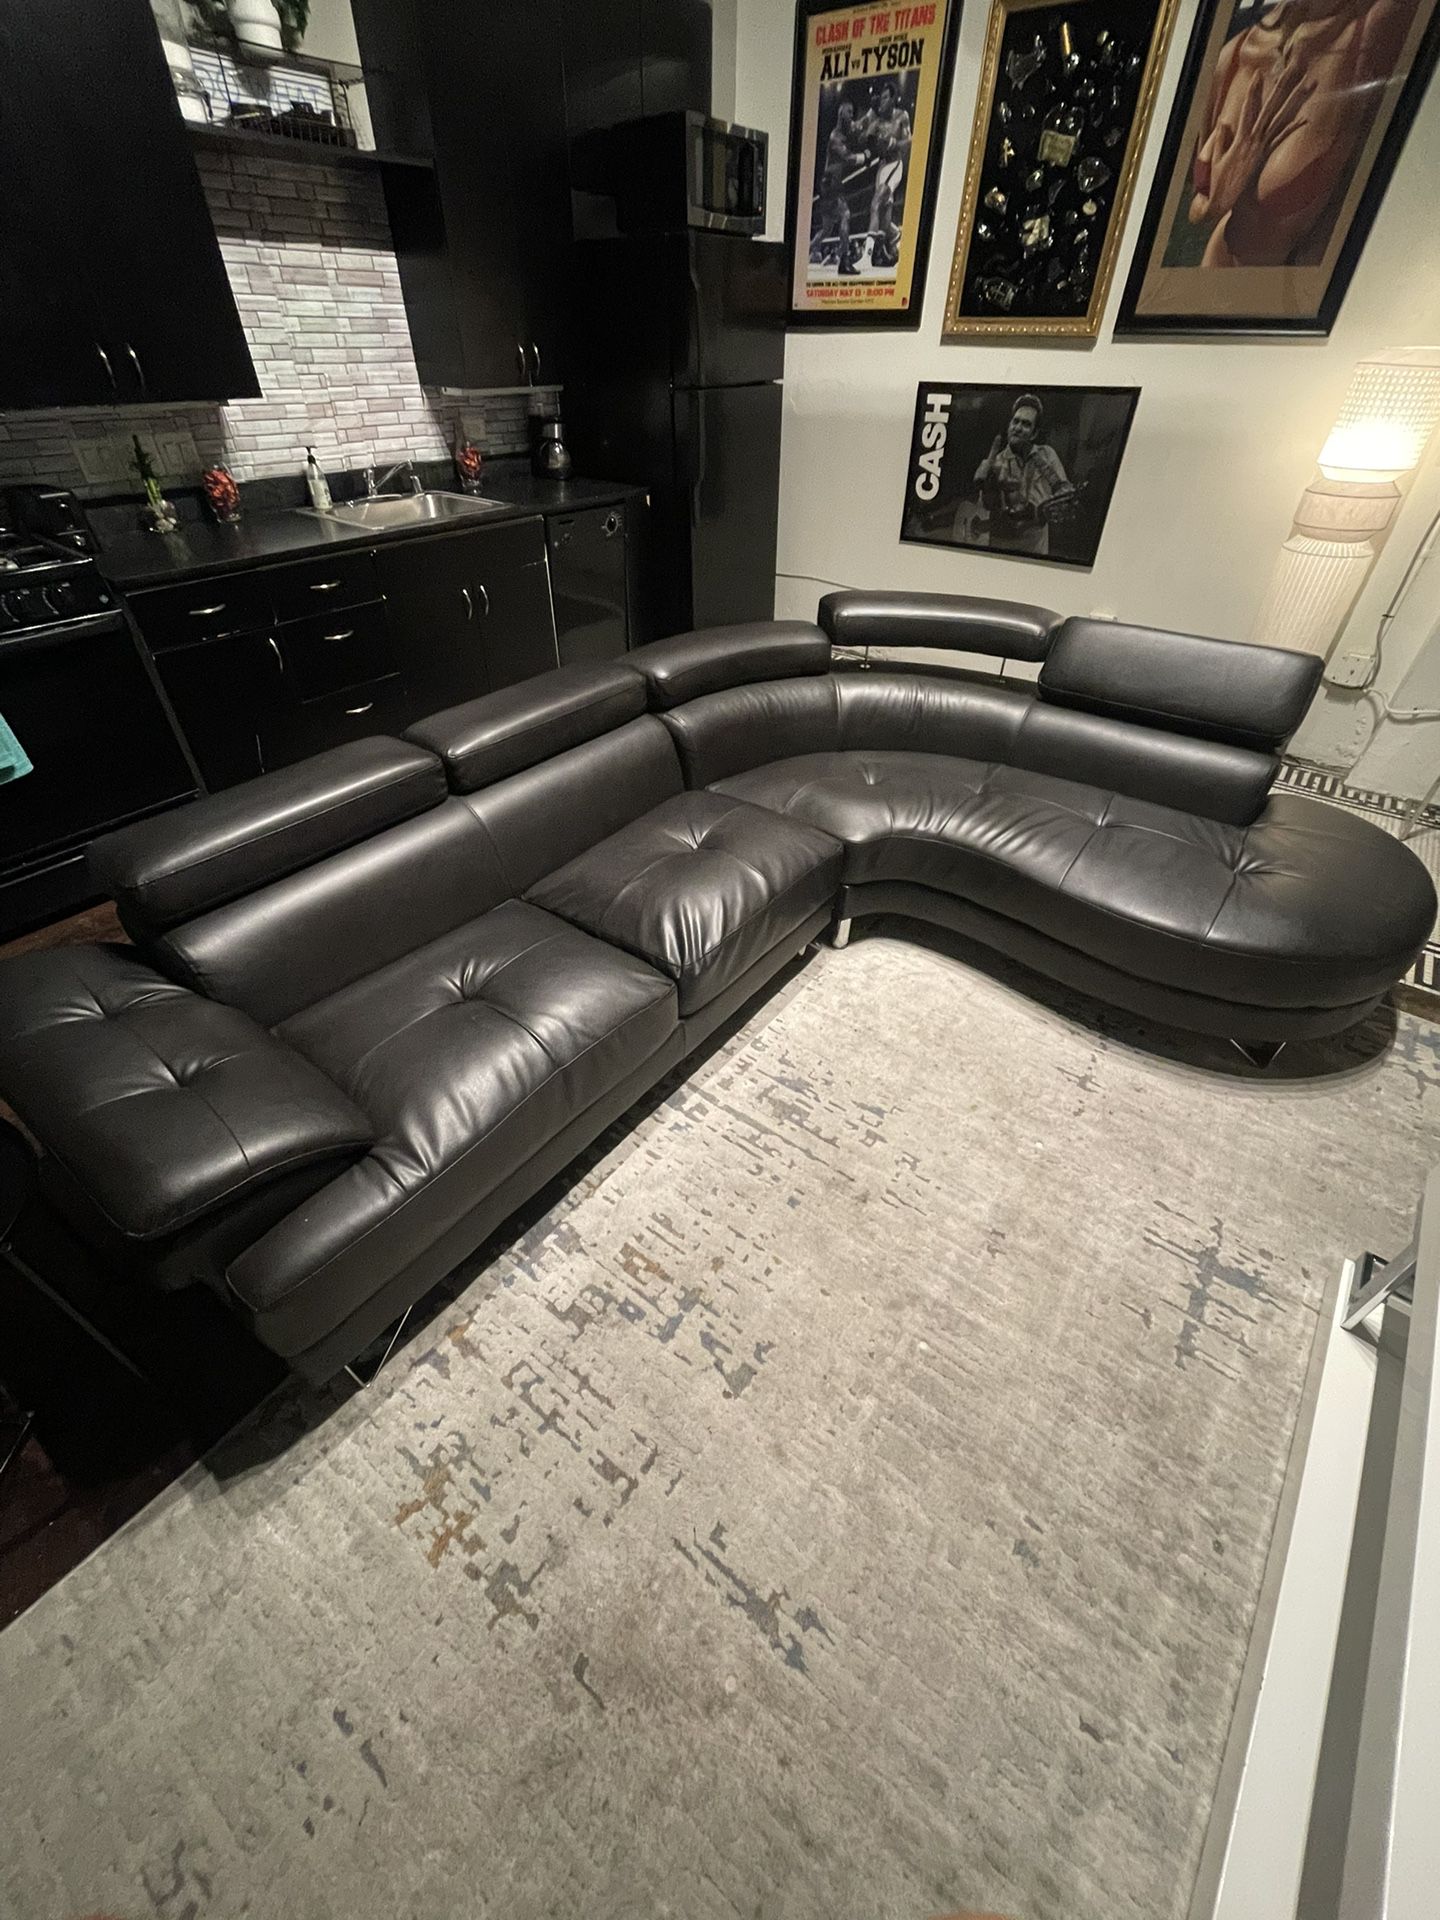 Cozy Leather Couch (L Shaped)